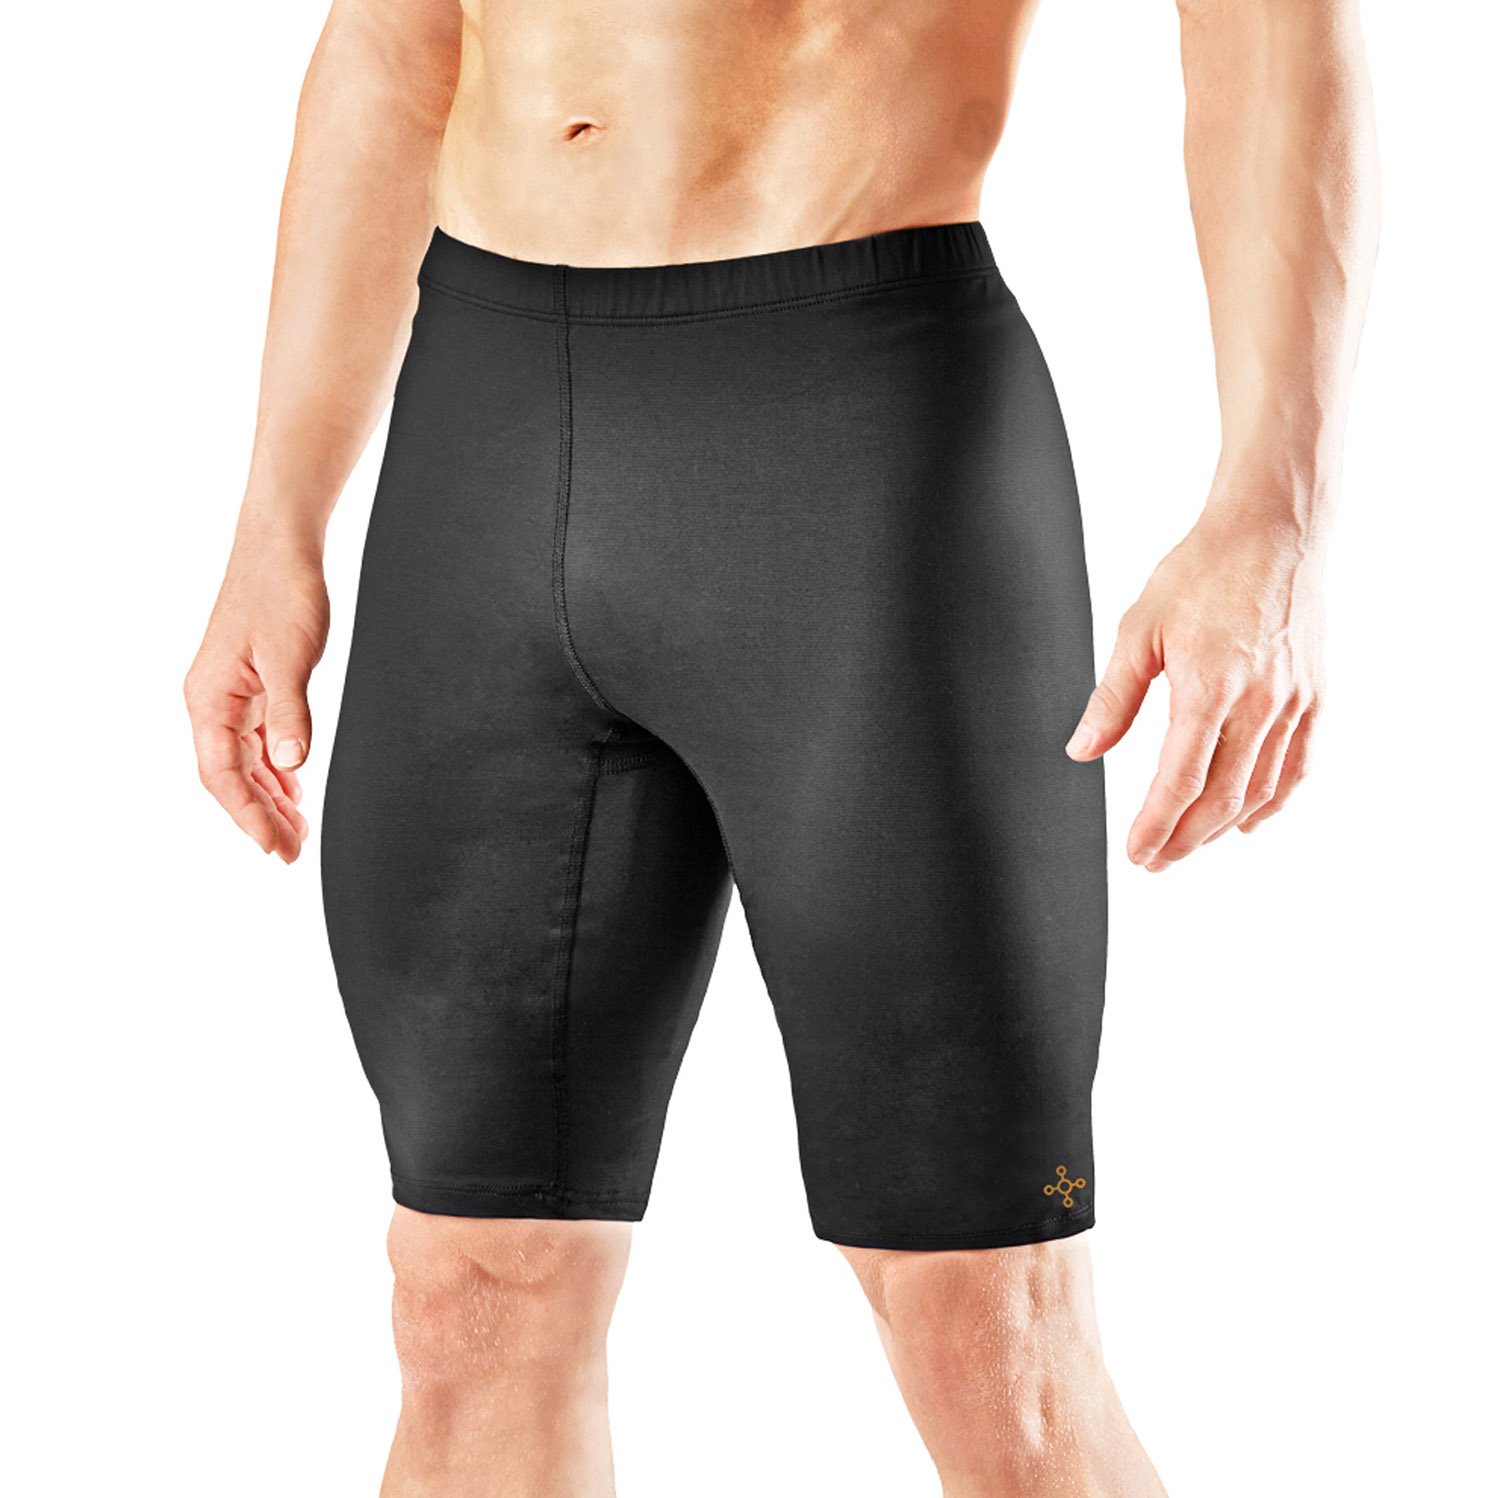 Tommie Copper Men's Compression Running Shorts